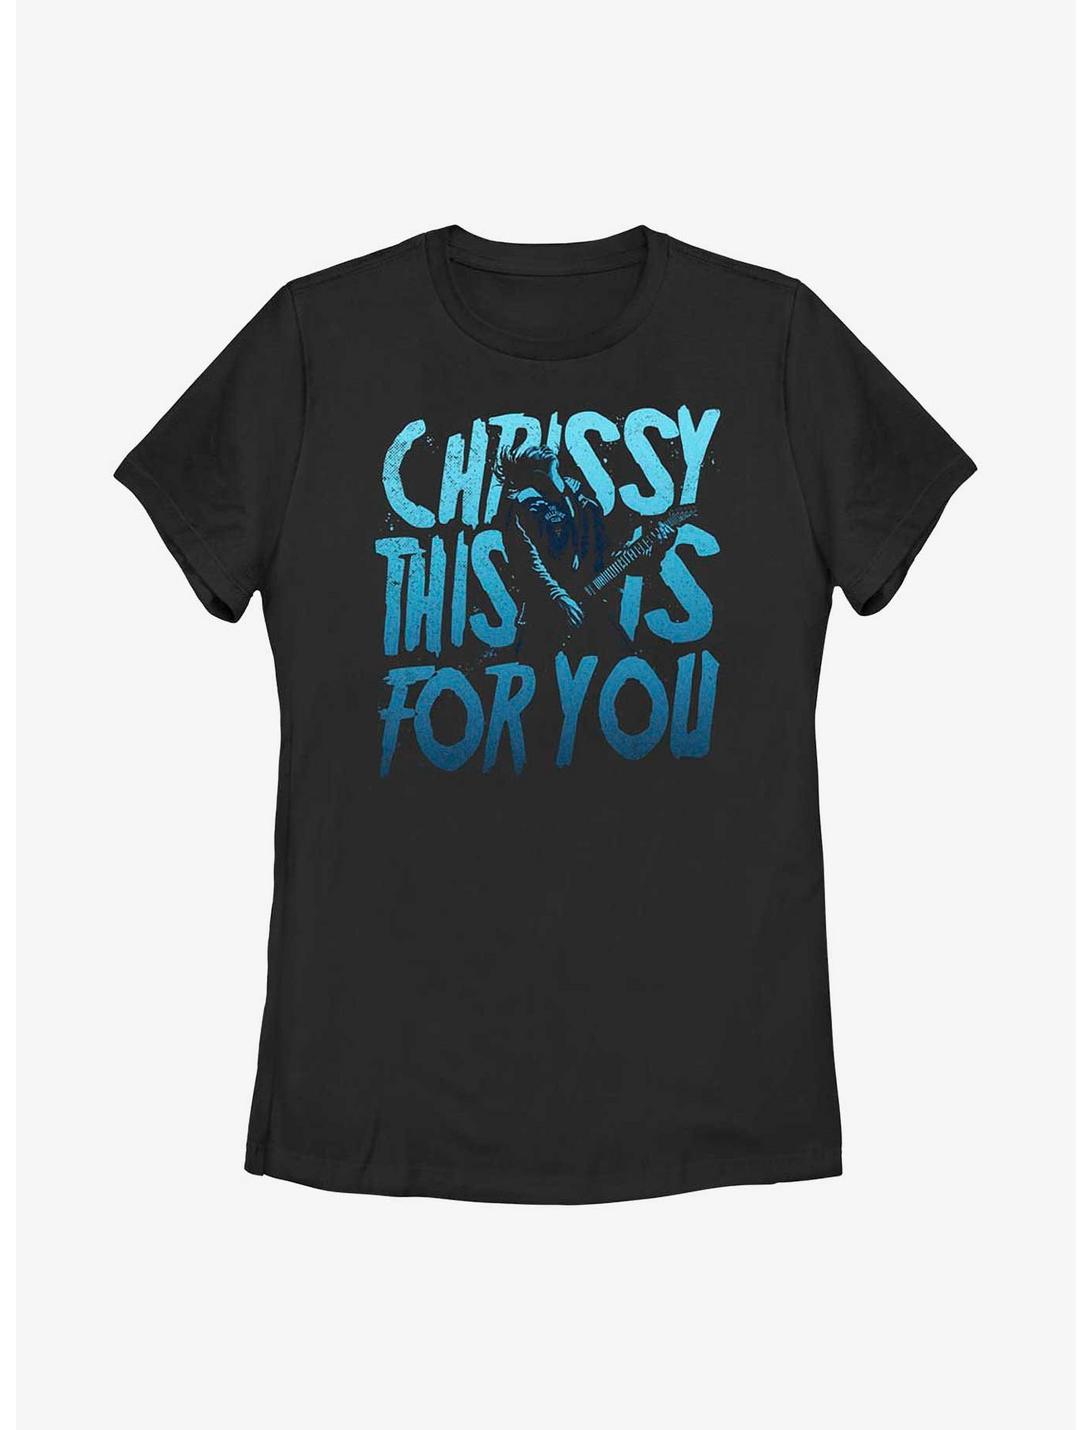 Stranger Things Chrissy This Is For You Womens T-Shirt, BLACK, hi-res